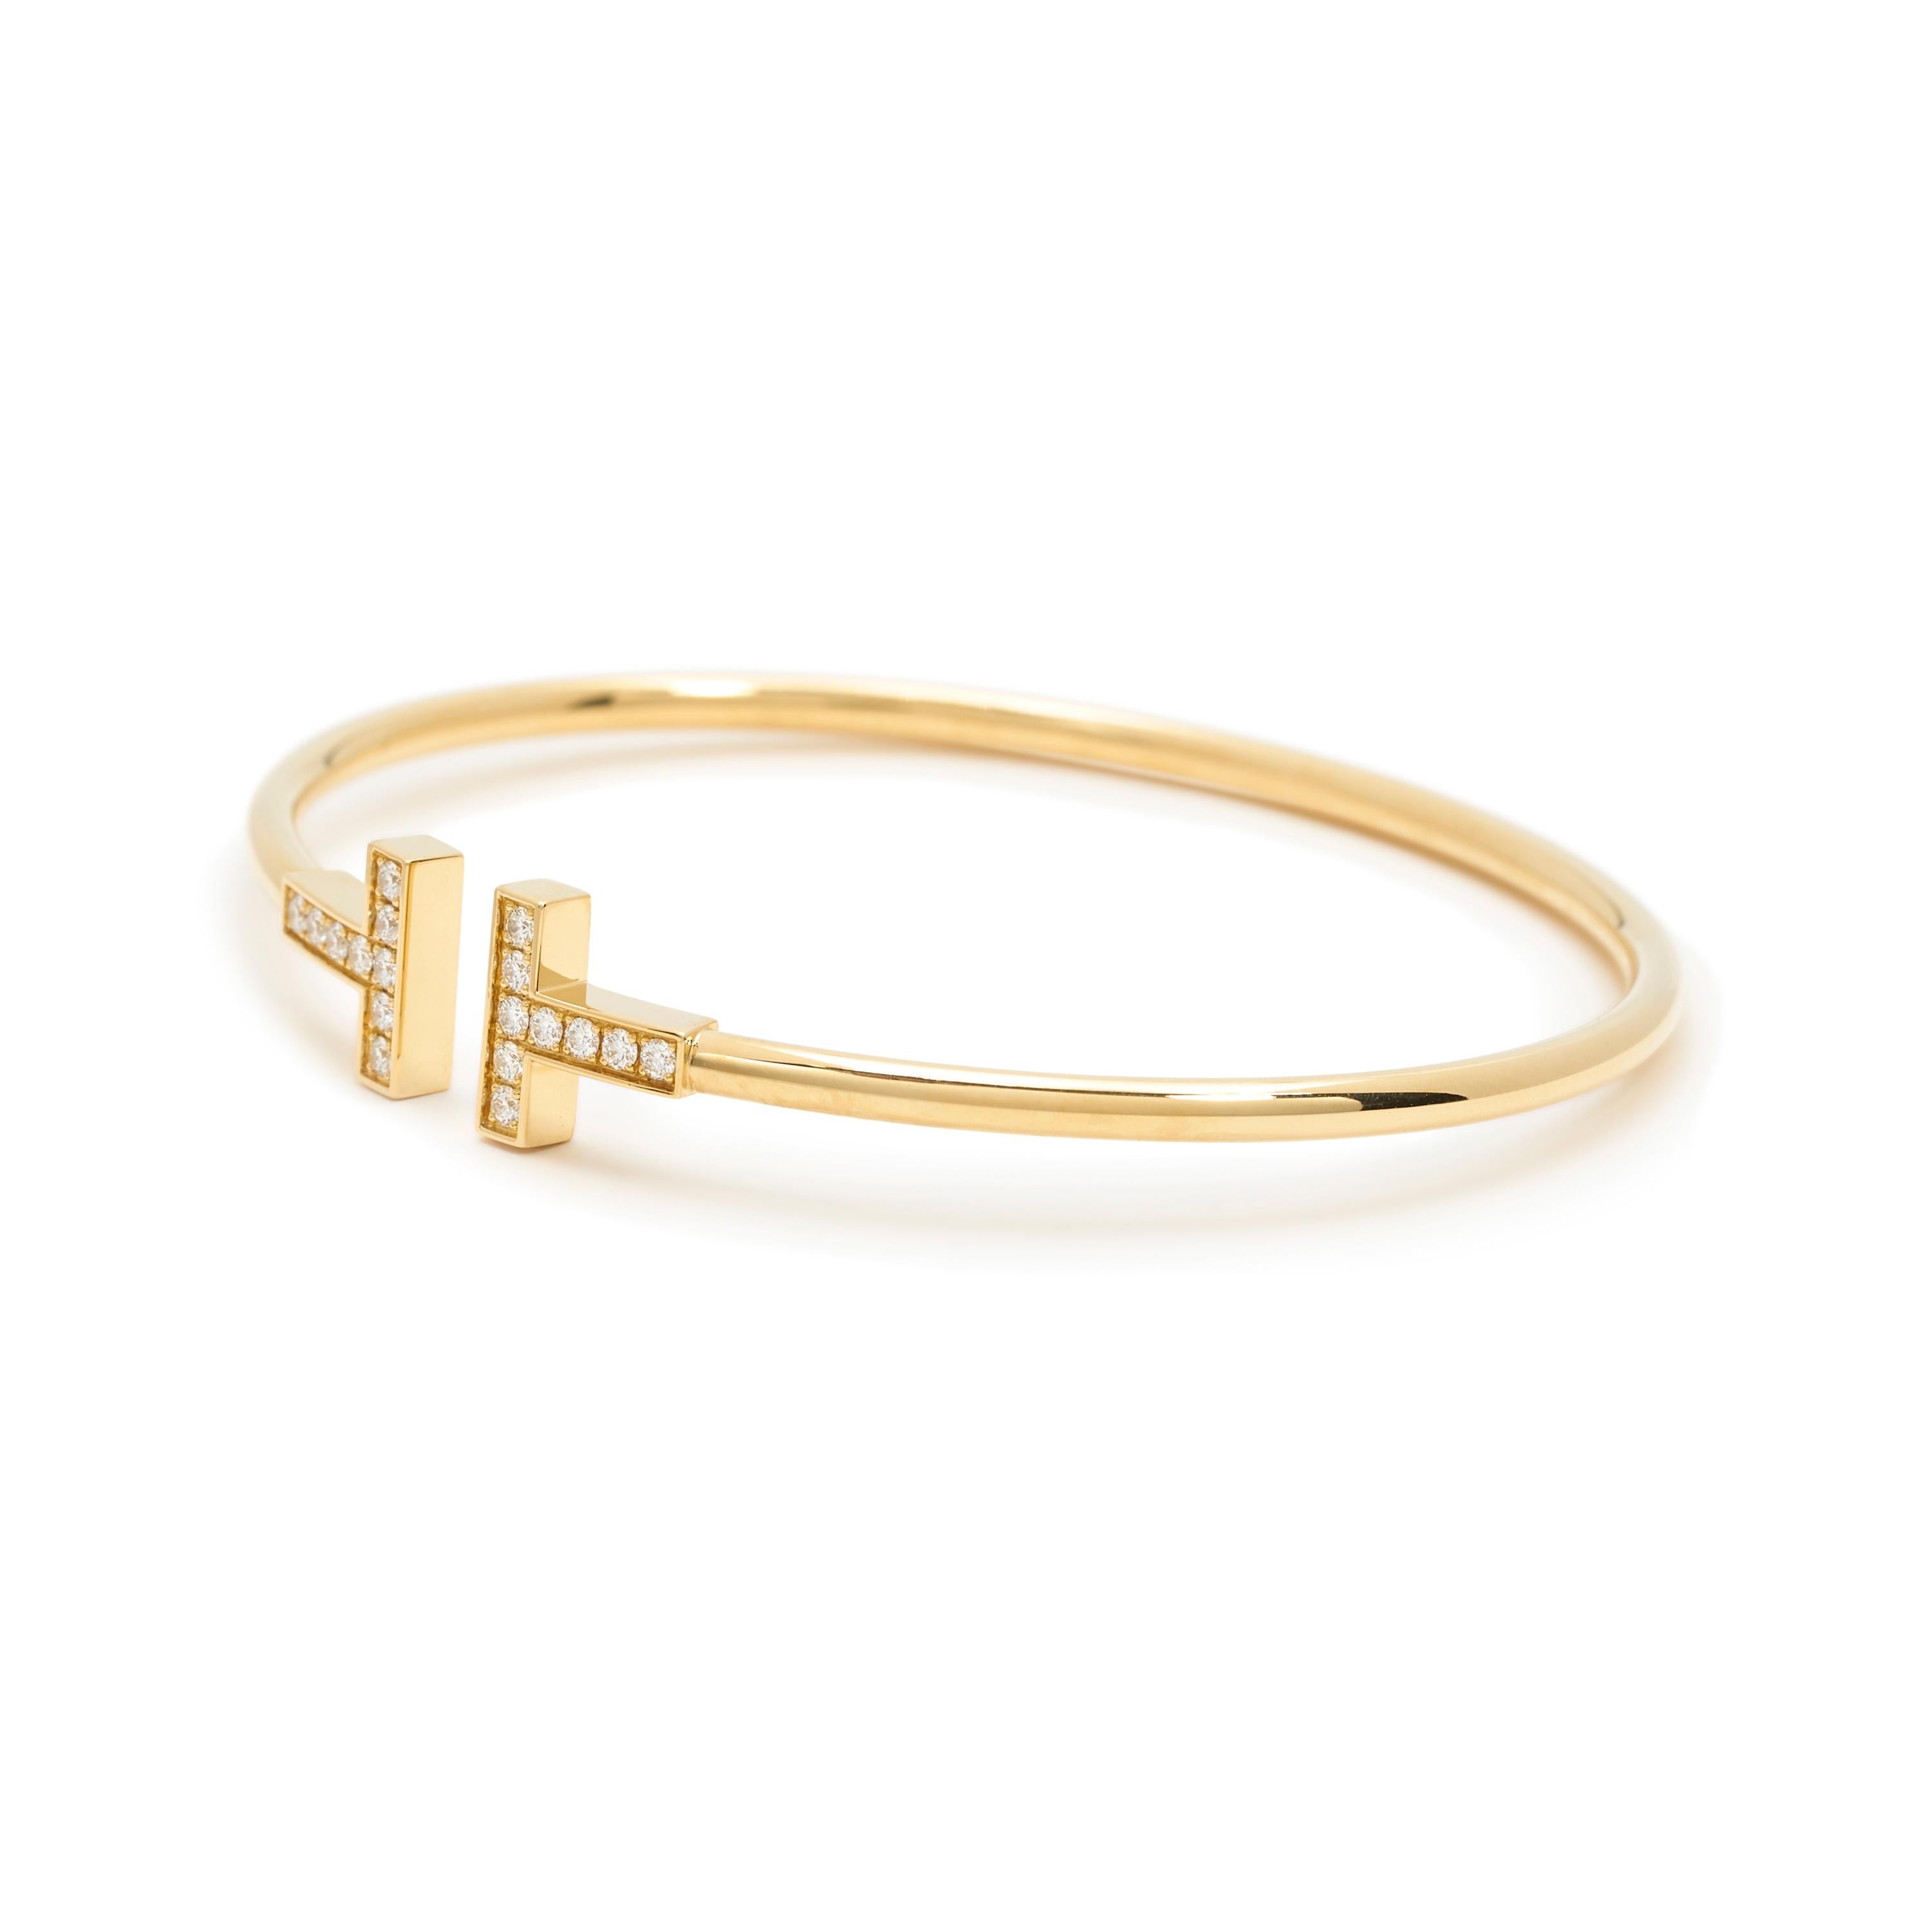 Authentic Tiffany & Co. wire bracelet from the Tiffany T collection crafted in 18 karat yellow gold with 18 diamonds weighing an estimated .22 carats. Size medium, can fit up to a size 6 1/4 wrist. Inspired by the strong, clean lines of the letter